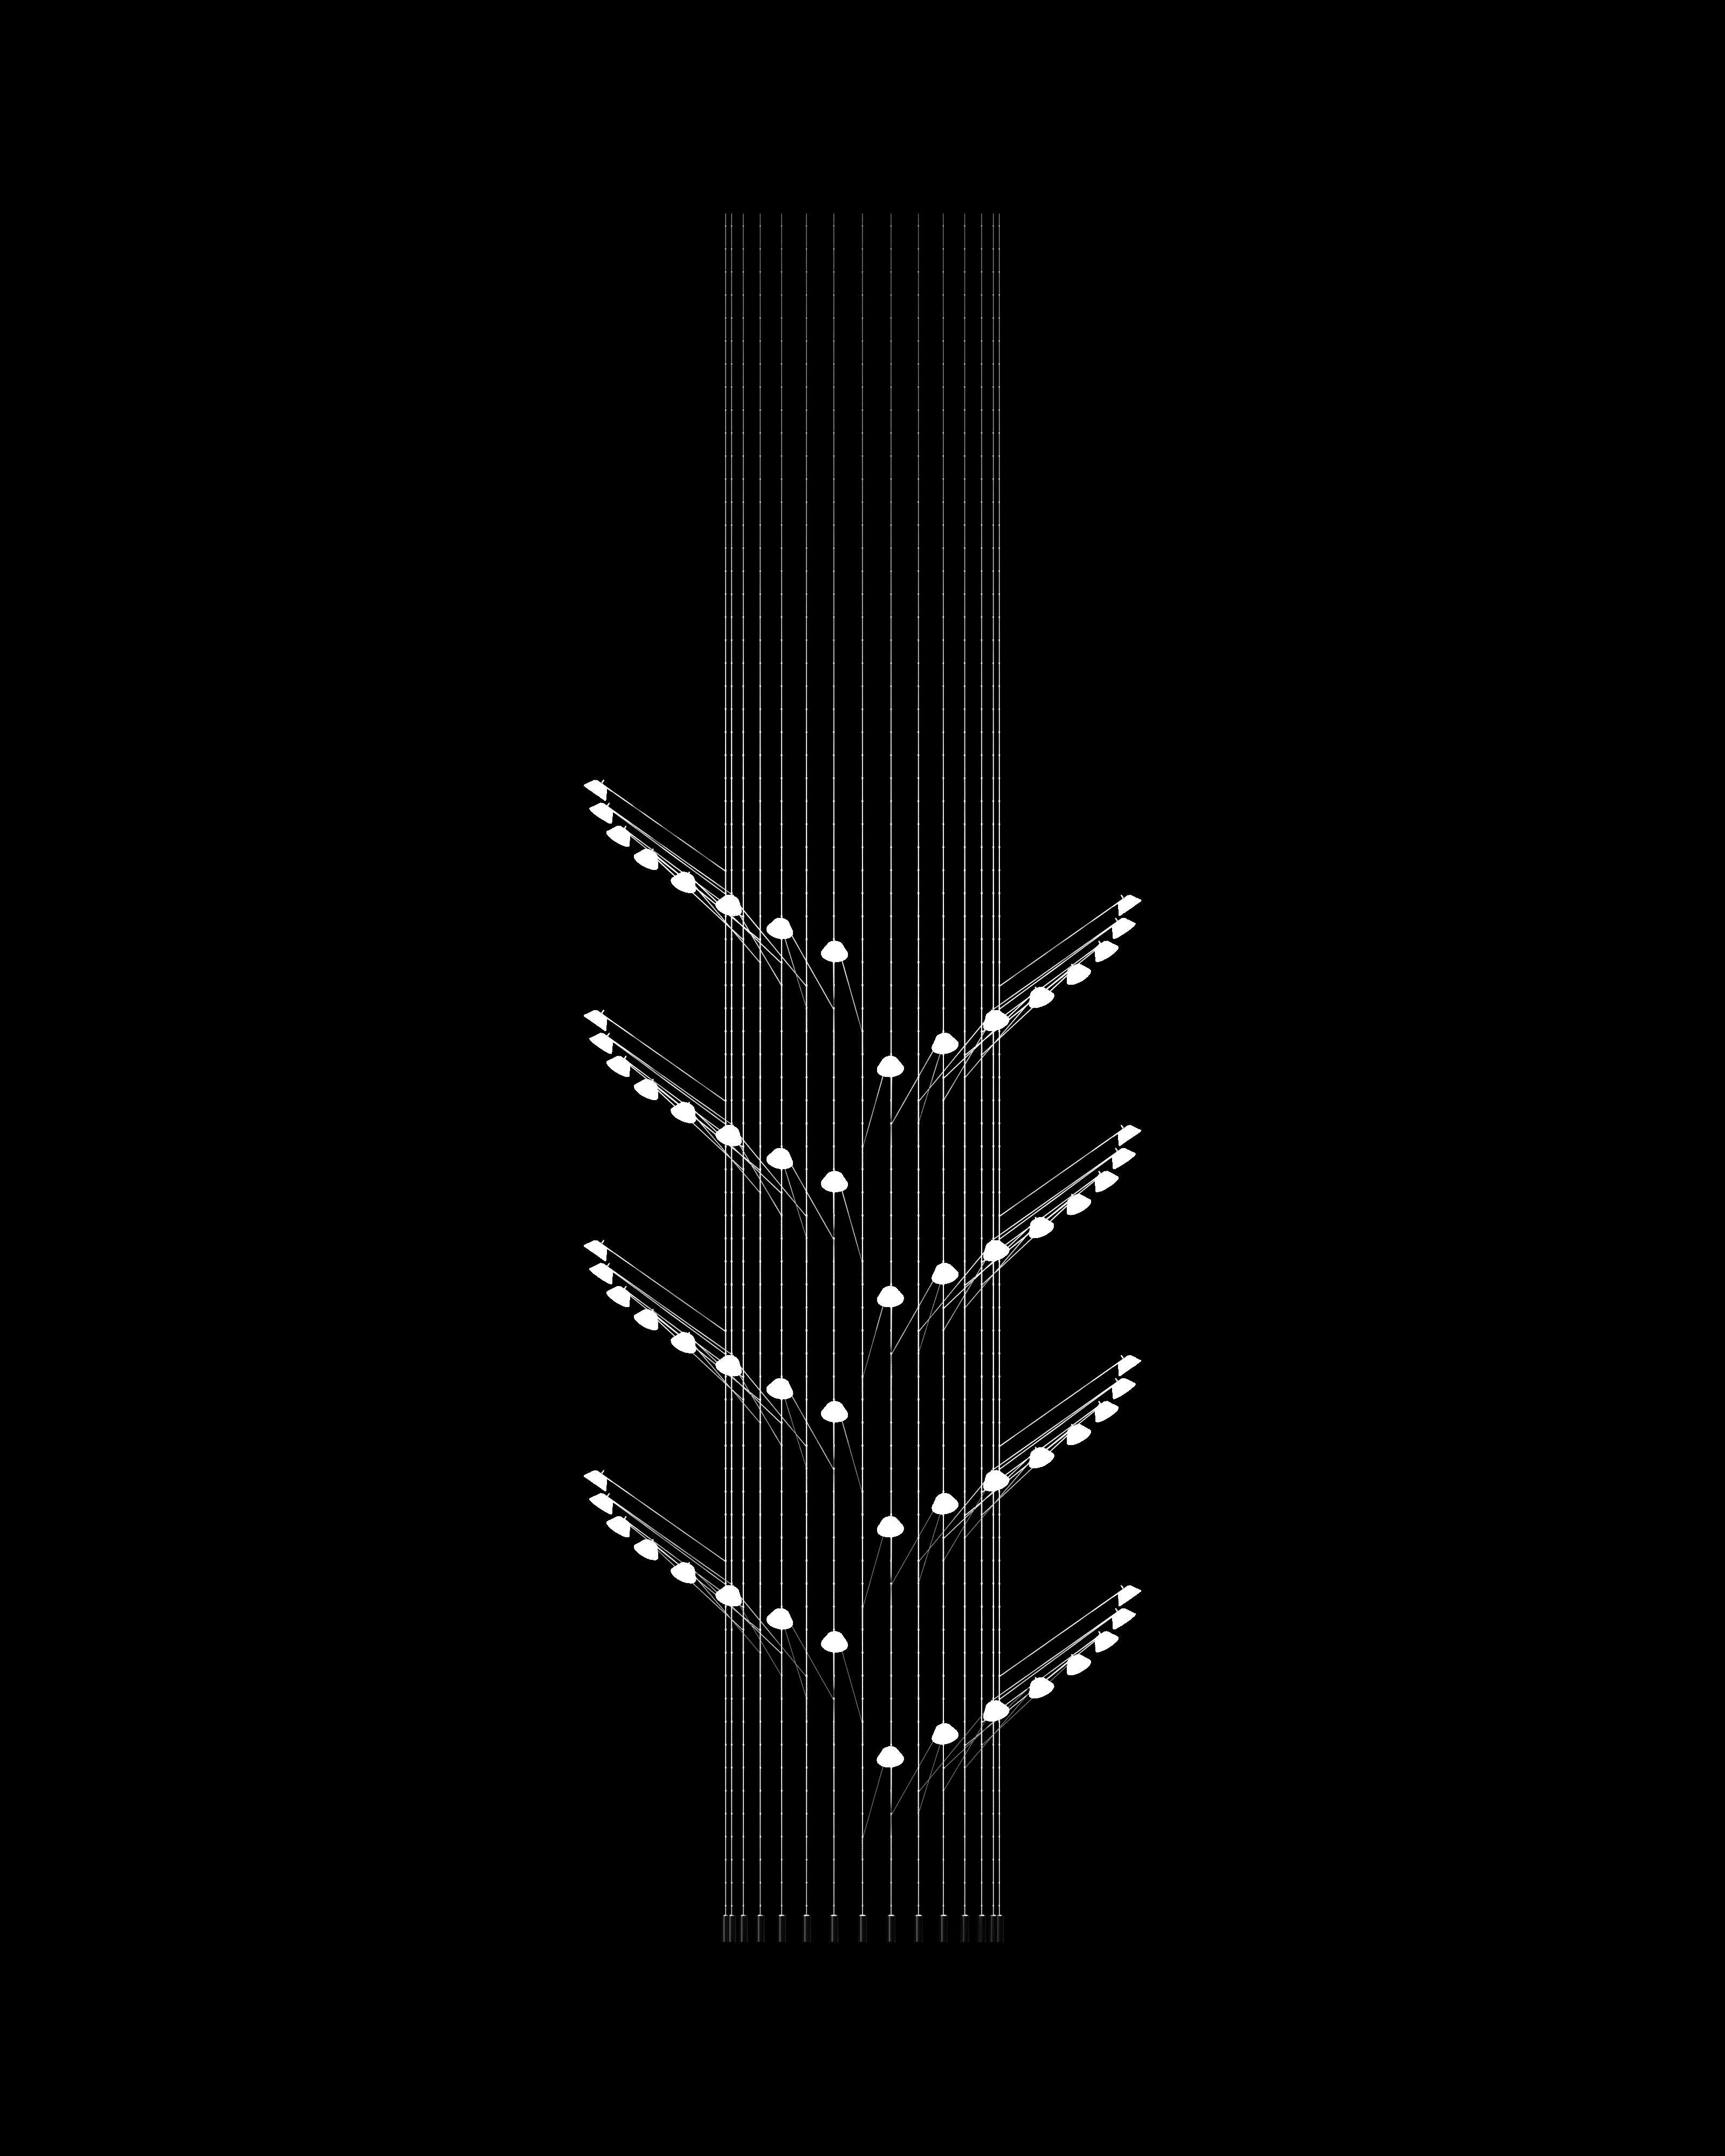 Floating lights 
Model A.16.01.E64 (Form.Rows.Version.Number of Elements)
Form: a (arch or half circle)
Rows: 15 (16 lines)
Version: 1
Number of elements: 64 lighting elements
 
The design functions as an interior tool made for any possible